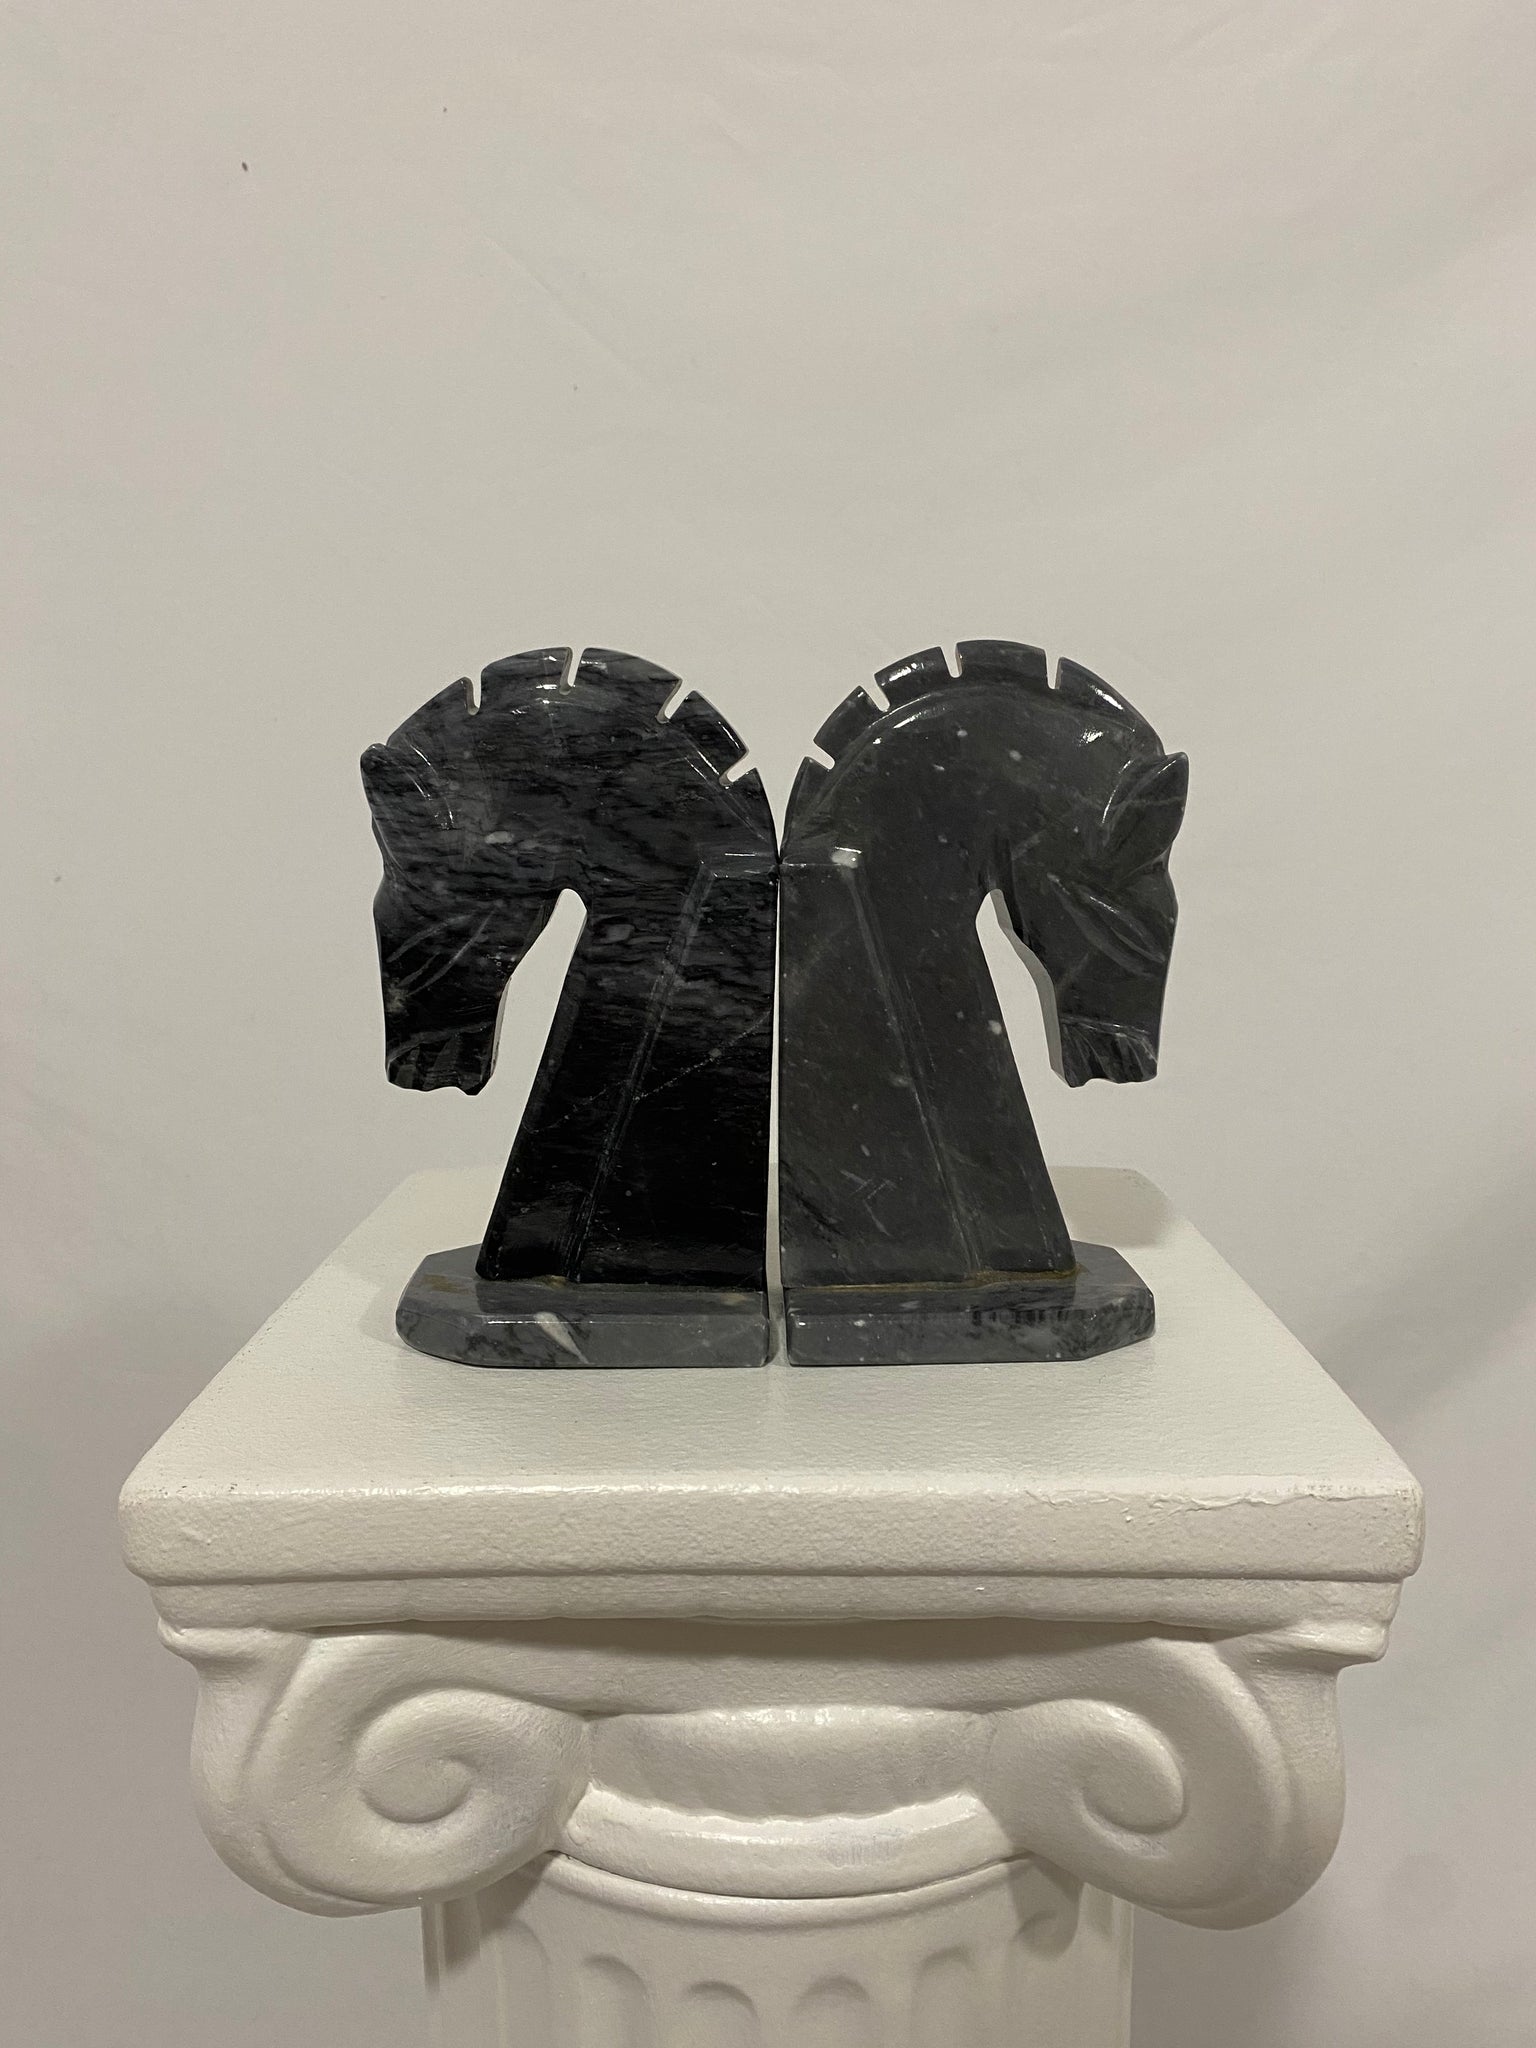 Black marbled onyx horse book-ends